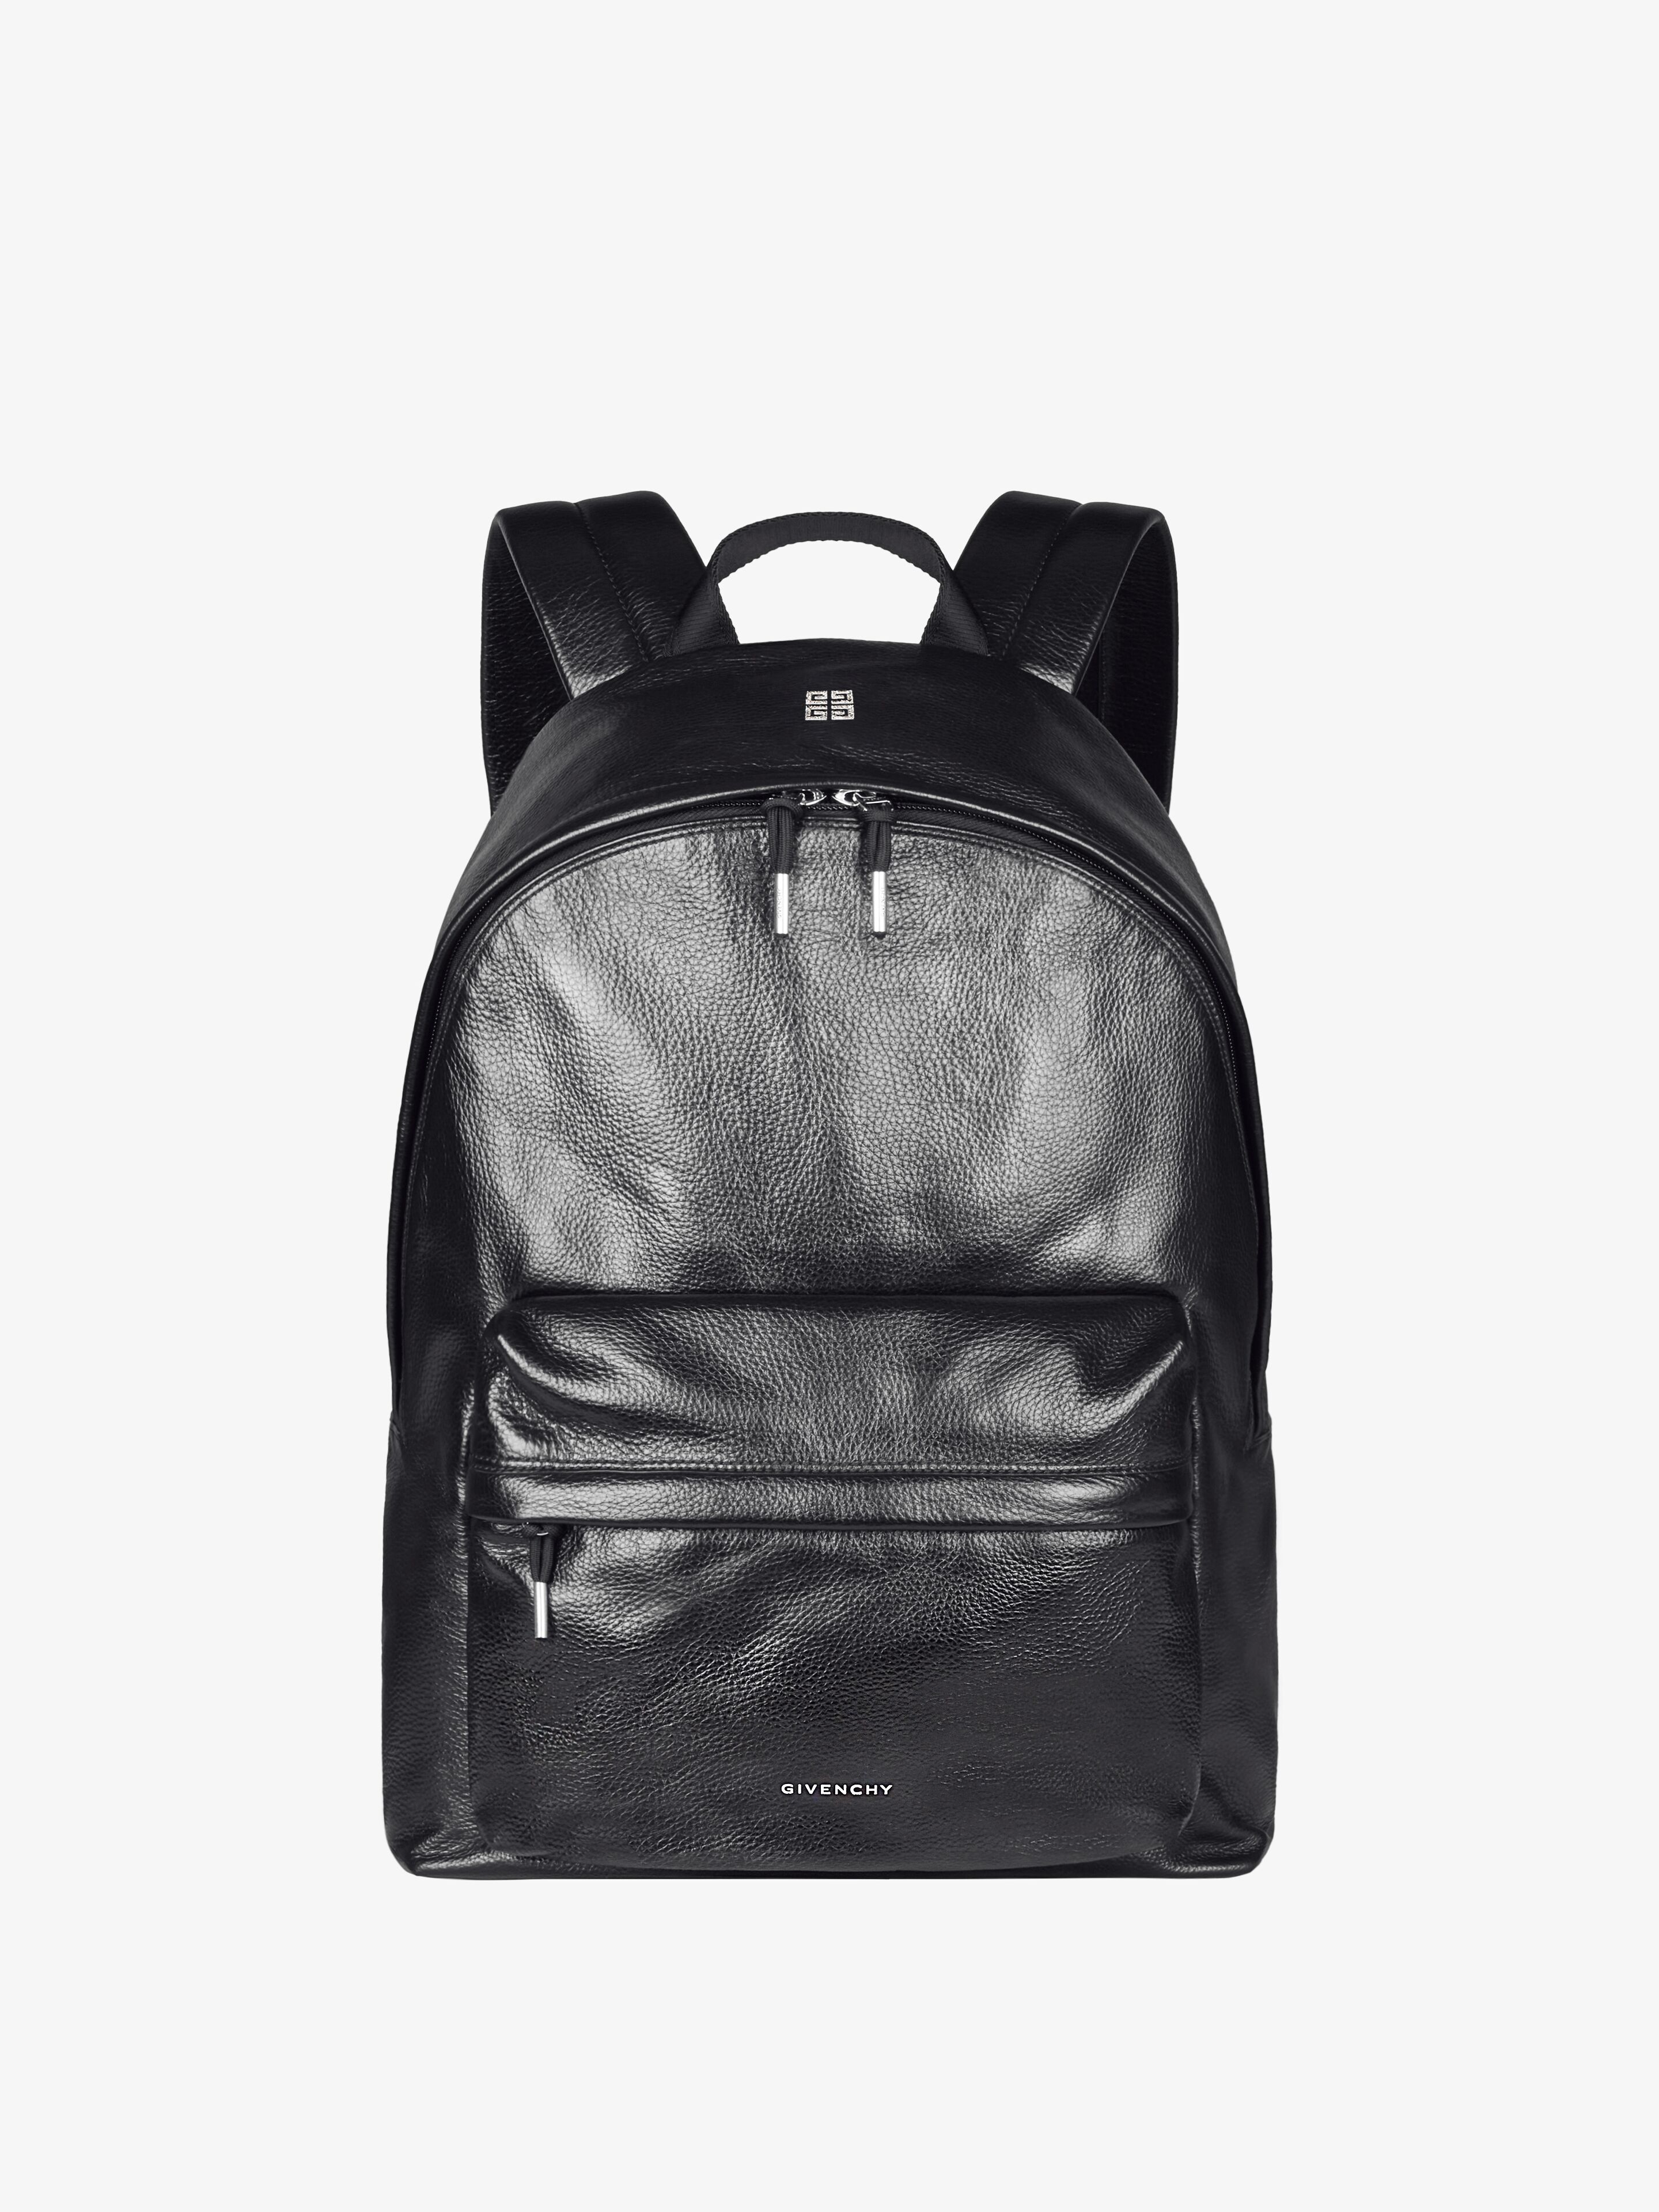 Luxury Backpacks Collection for Men | Givenchy